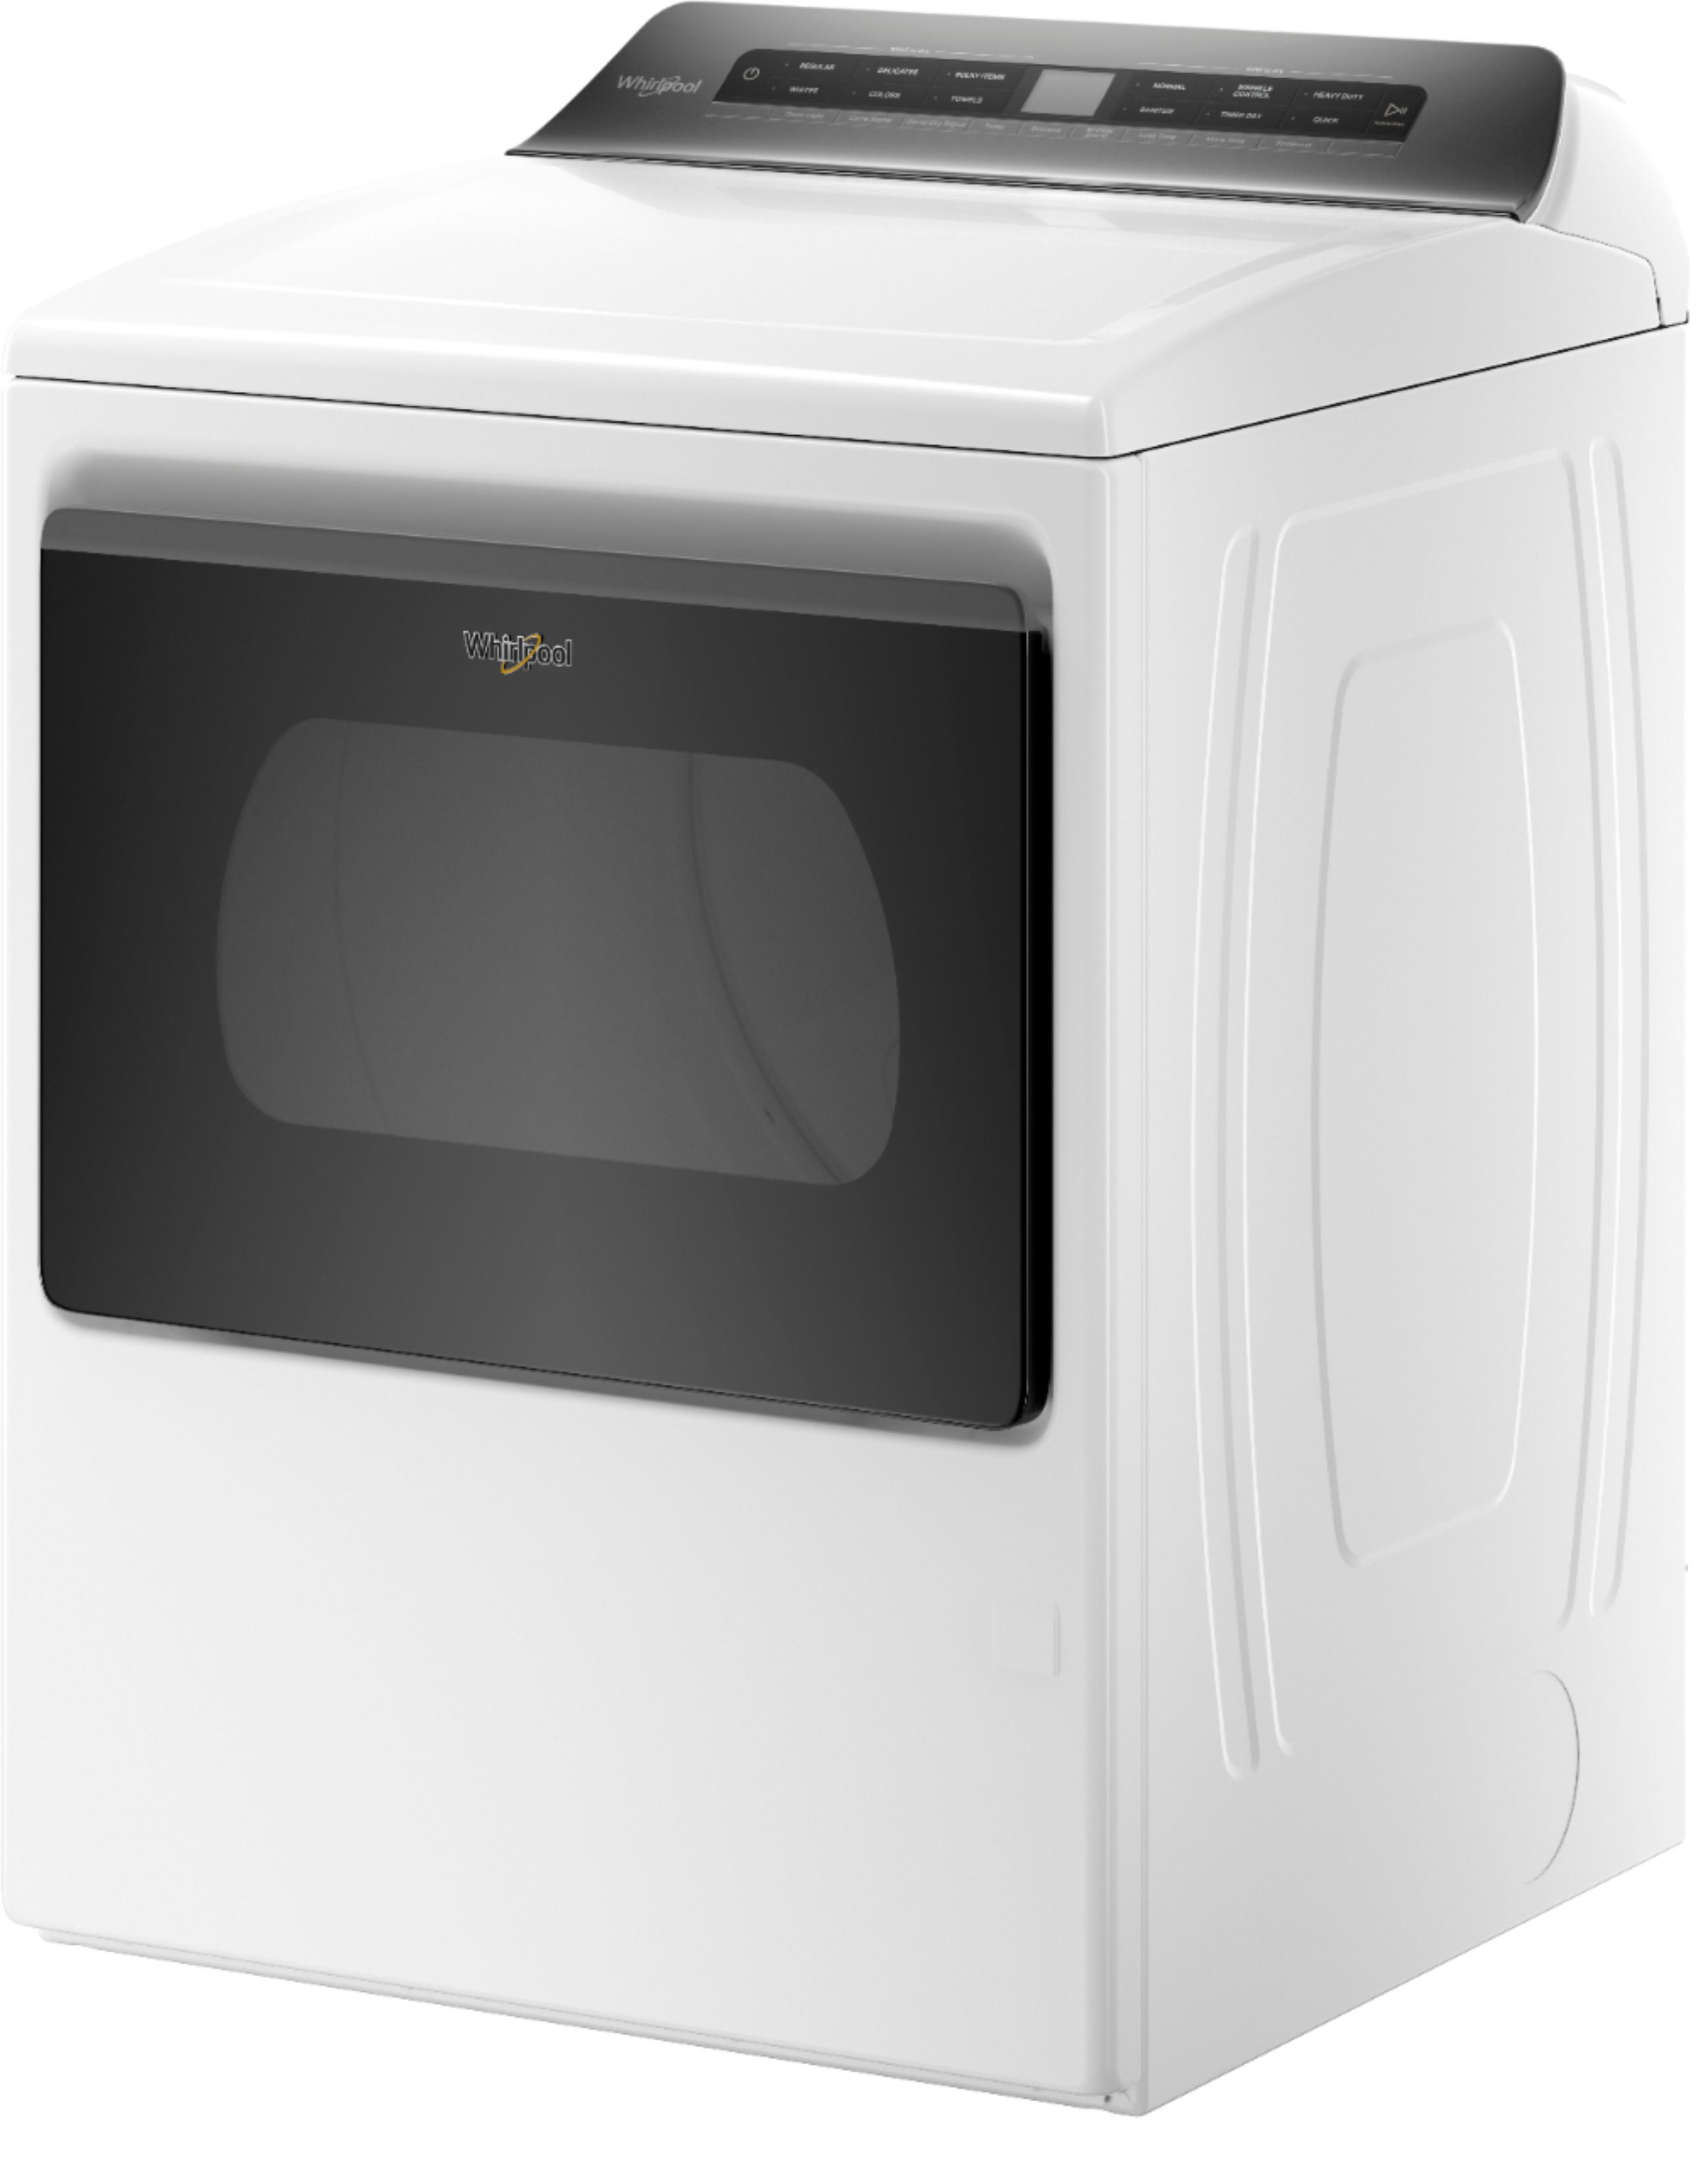 Left View: Whirlpool - 7.4 Cu. Ft. Gas Dryer with AccuDry Sensor Drying System - White